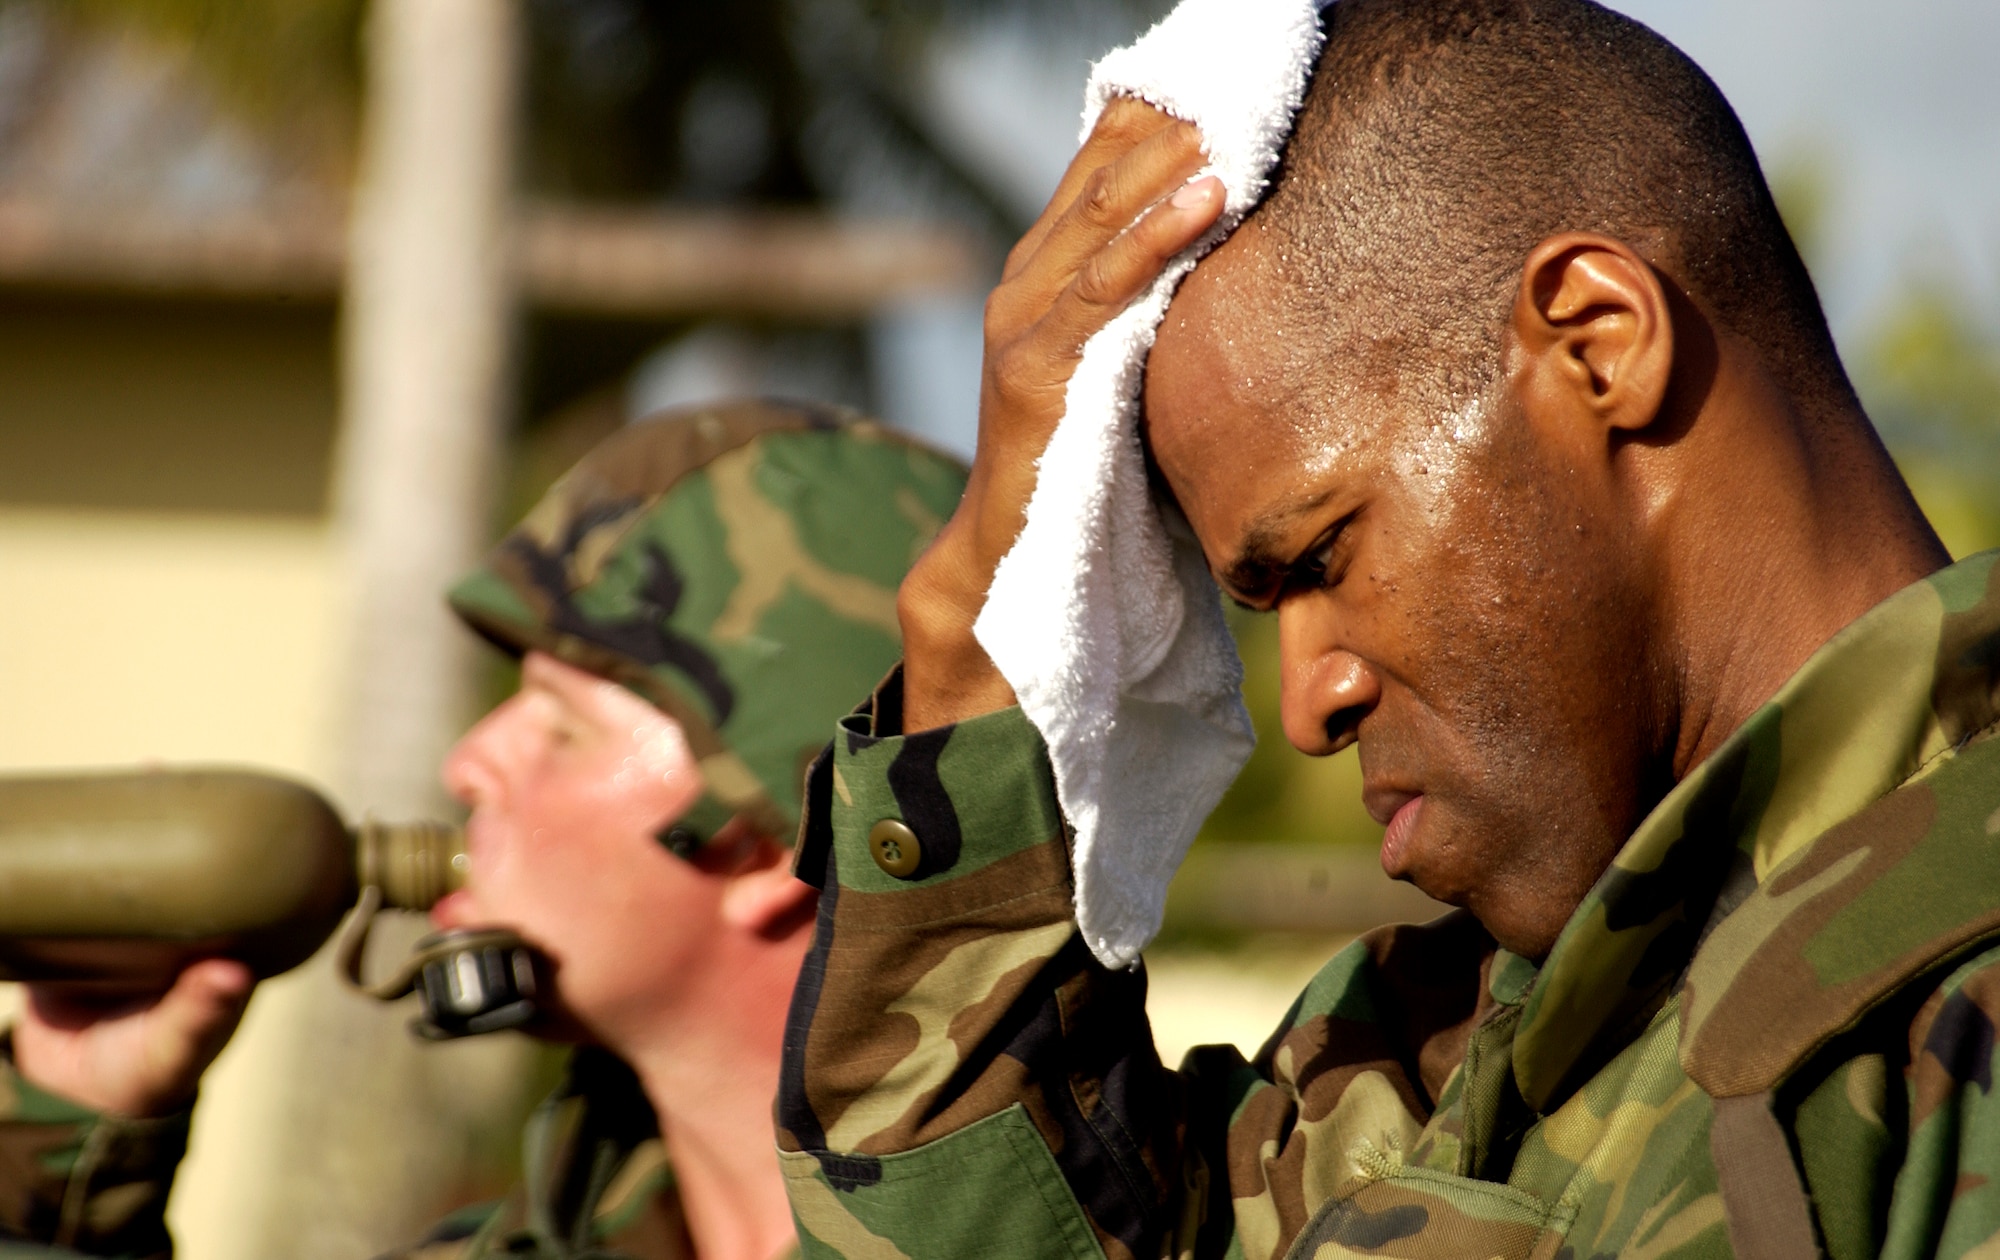 Capt. John Key wipes away the sweat running down his forehead during a break in convoy and weapons familiarization training, which is part of the Guam Initial Readiness Response Exercise, or GIRRE, Tuesday, March 14, 2006. The GIRRE is an annual island-wide exercise between Andersen Air Force Base and Naval Marianas to train on war plan deployments and joint disaster response skills. During the GIRRE, 300 Air Expeditionary Force Airmen will participate under conditions they may see when deployed. The mission of this exercise is readiness and to prepare AEF Airmen with skills they can use to keep alive downrange while working with Navy and Government of Guam agencies on disaster response to save lives at home. (U.S. Air Force photo/Airman 1st Class Miranda Moorer)